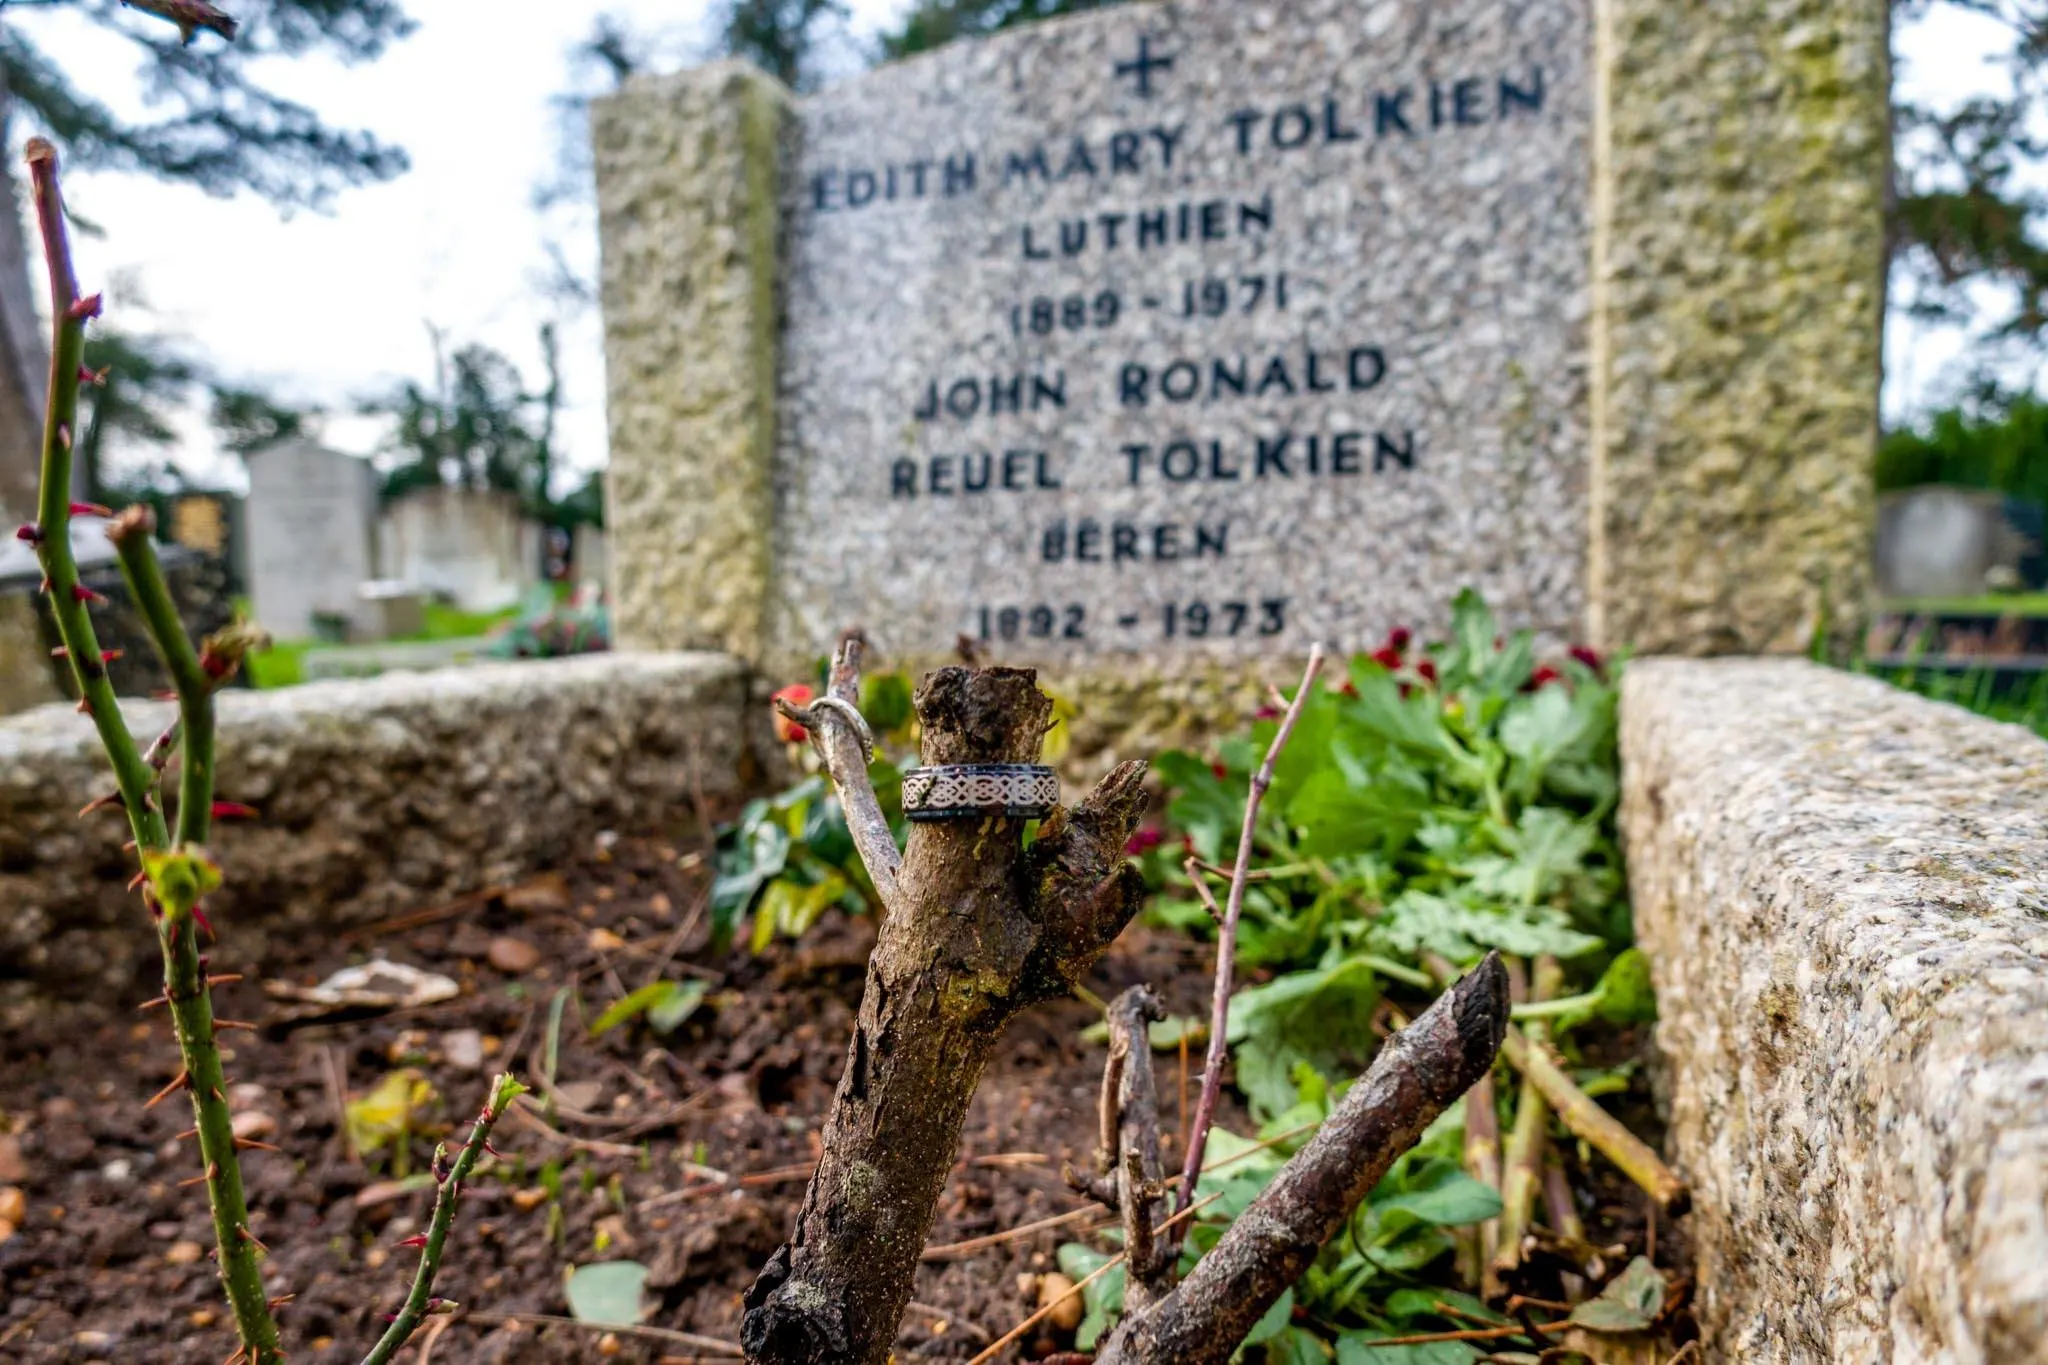 Rings around the stalk of a rosebush at the grave of JRR Tolkien and his wife 